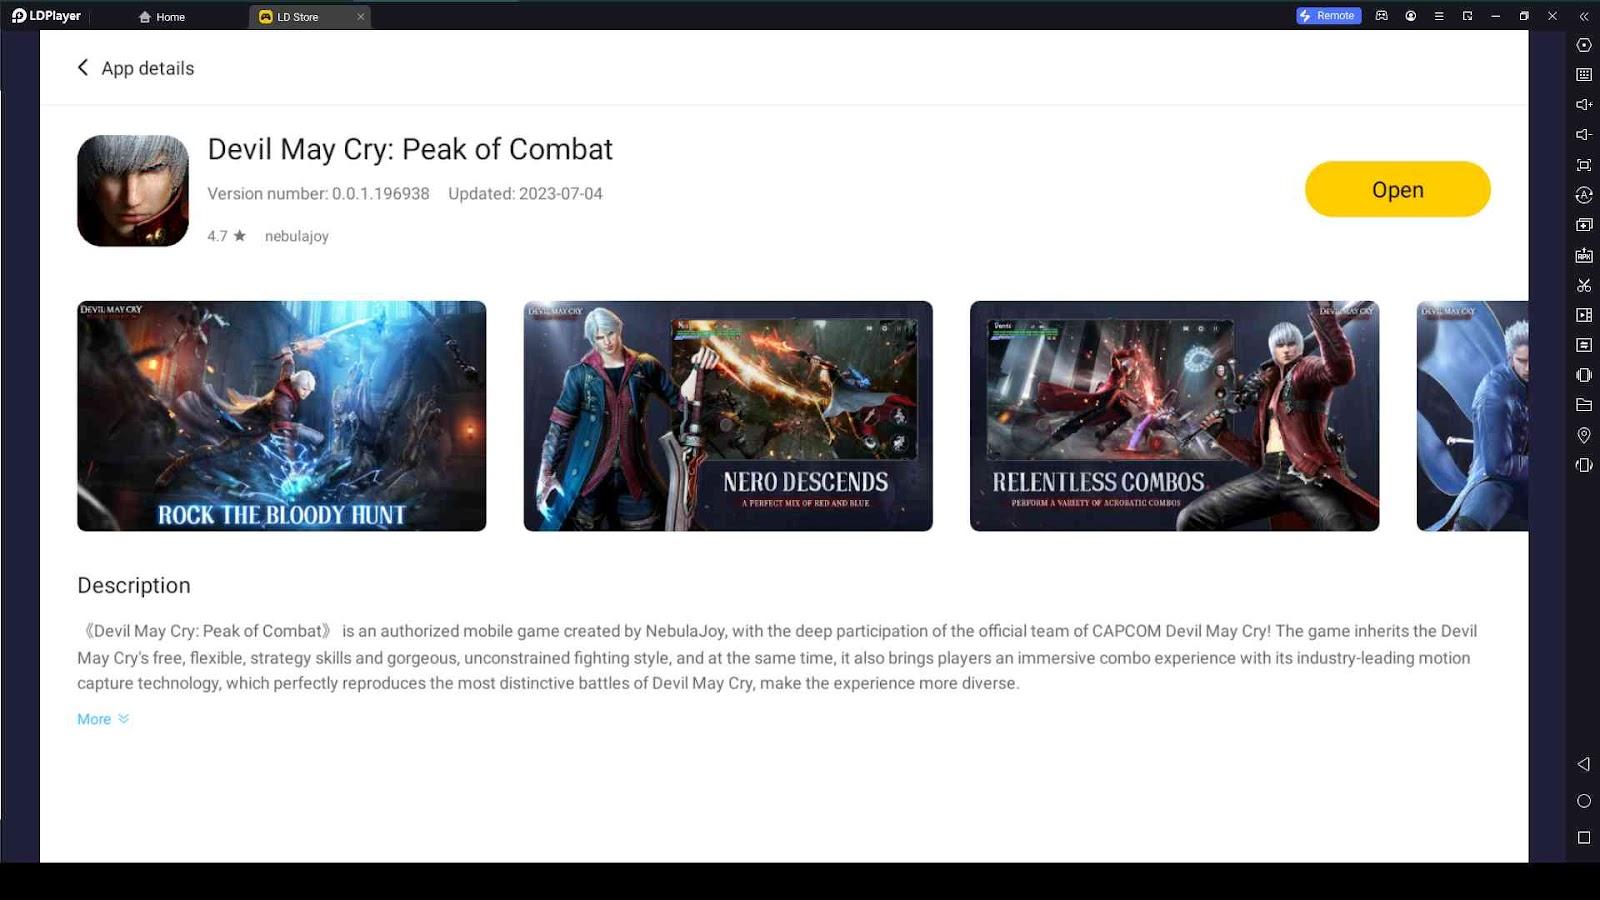 Running Devil May Cry: Peak of Combat on PC